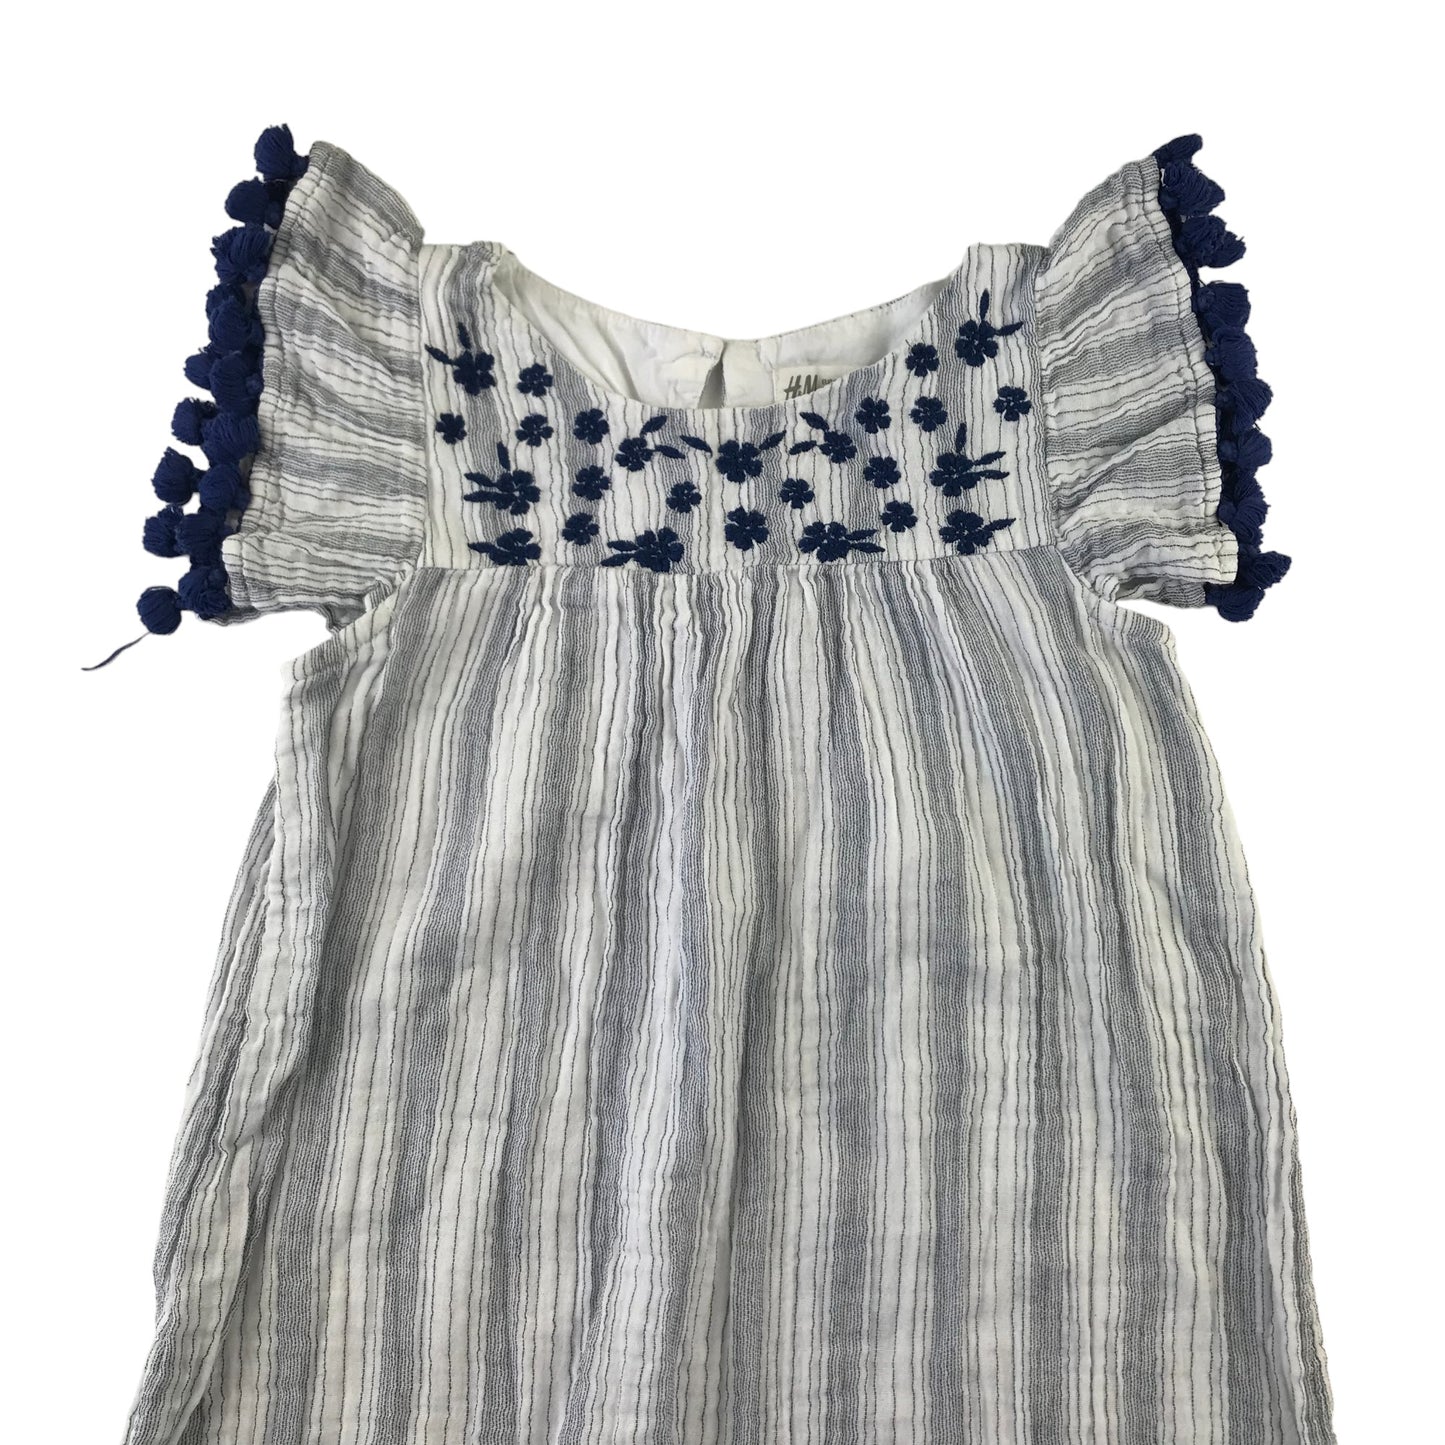 H&M dress 7-8 years white and navy floral embroidered empire cut butterfly sleeve cotton